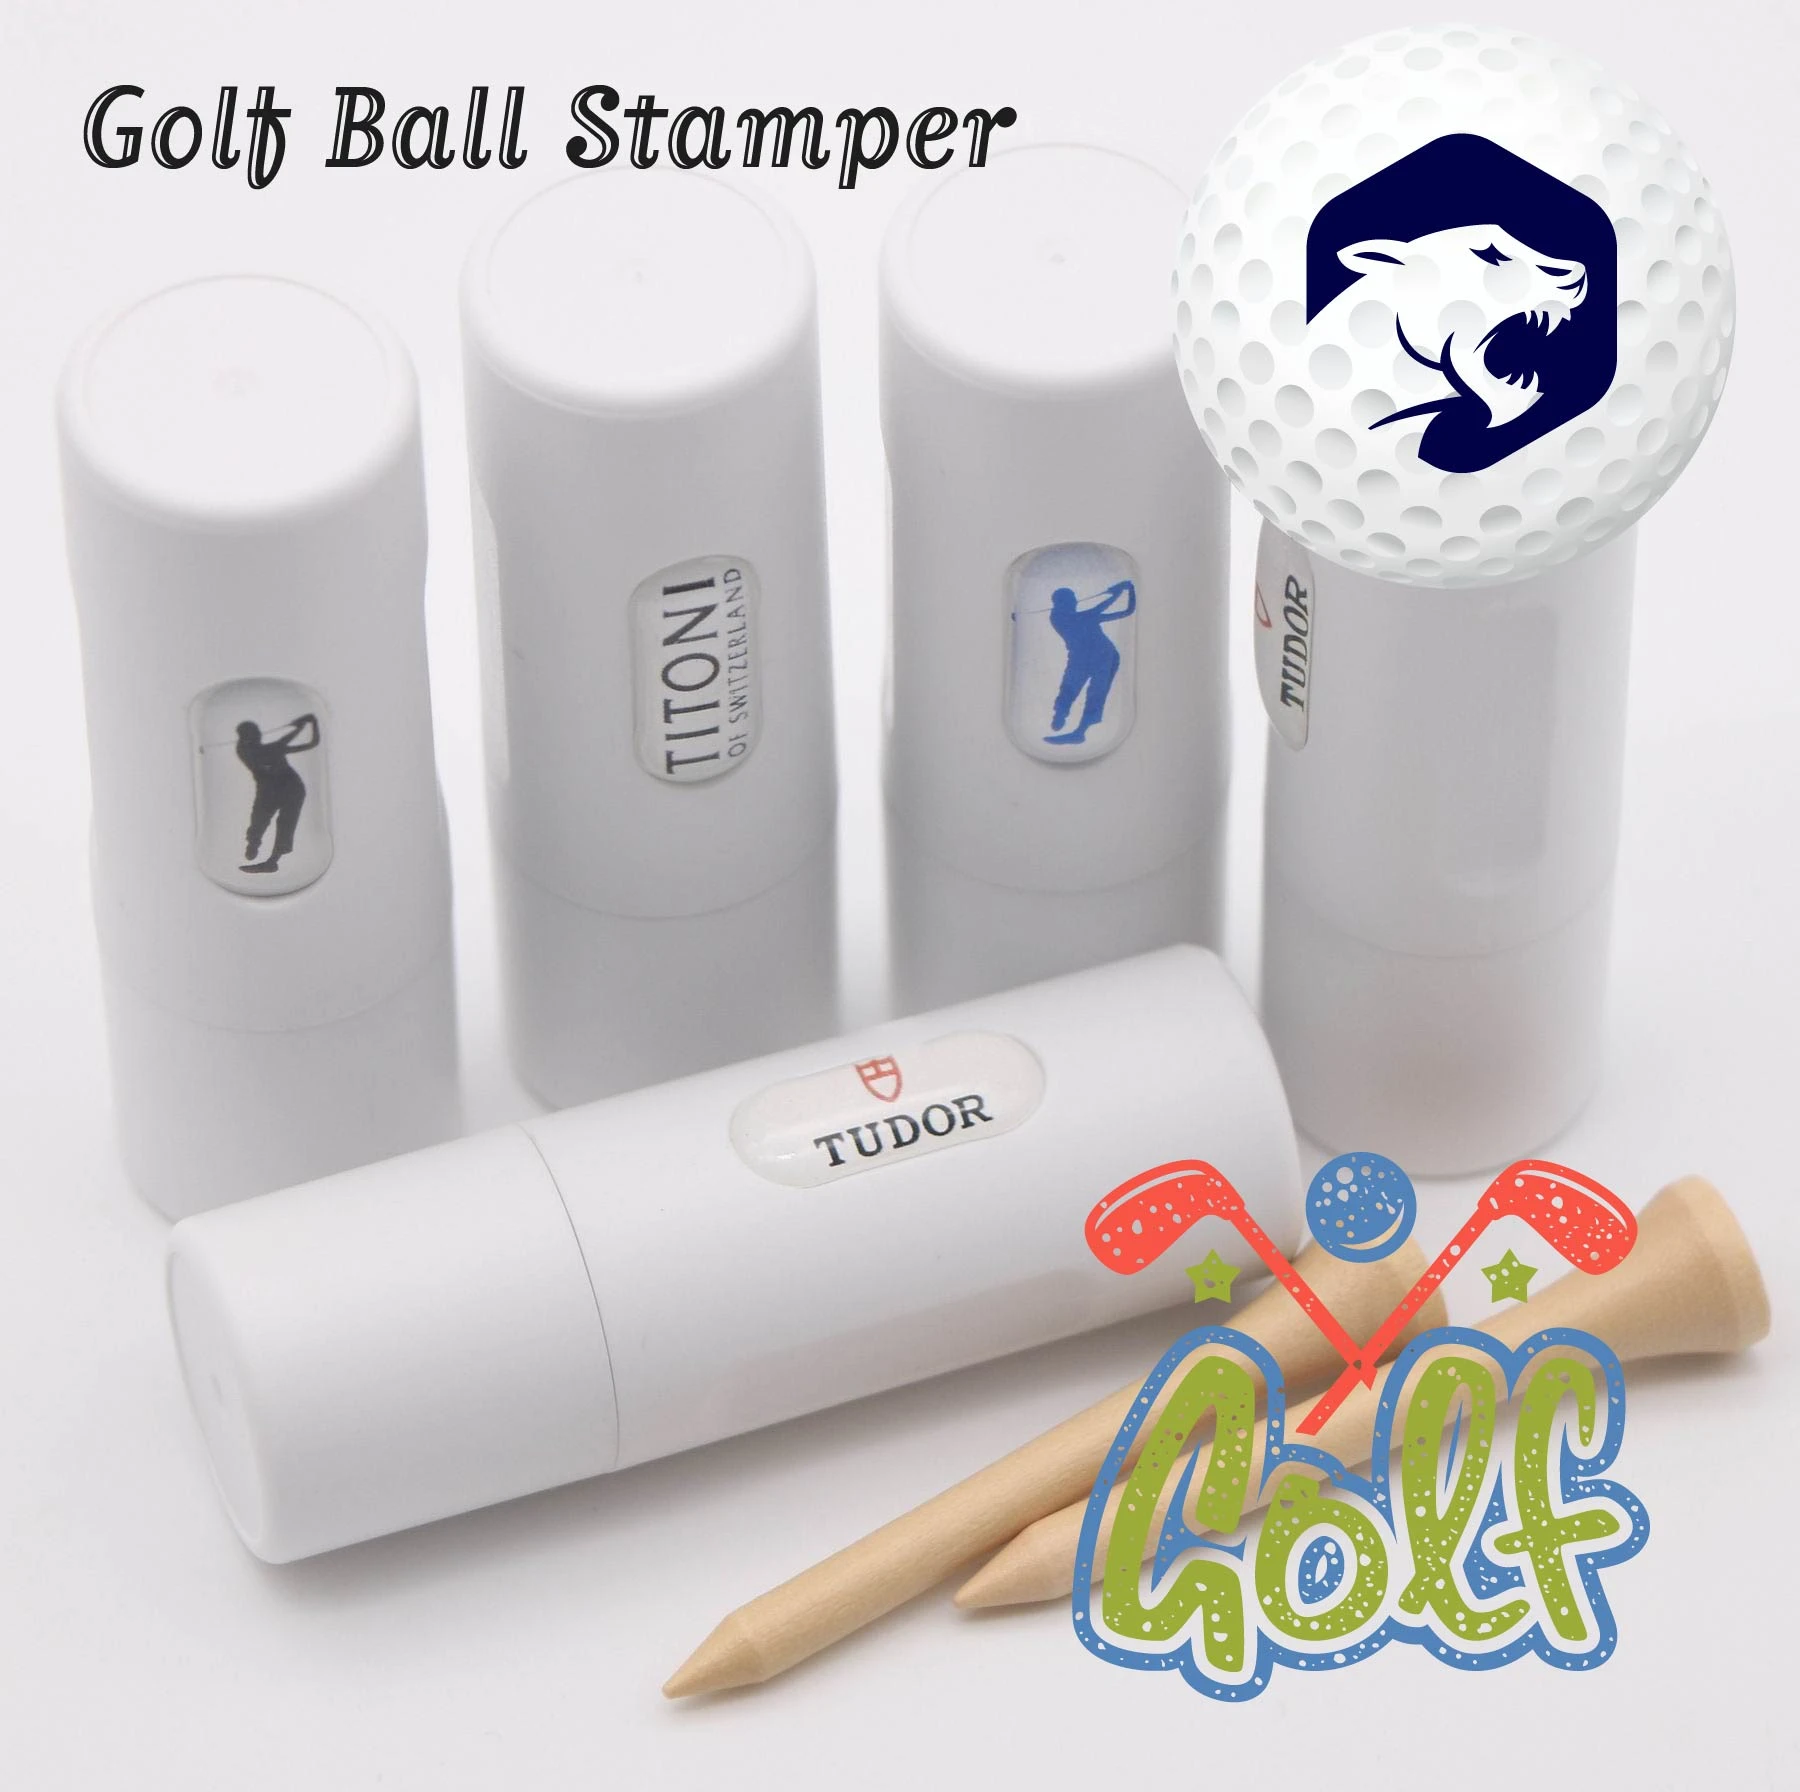 Personalized Custom Golf Ball Stamper hot selling golf accessories